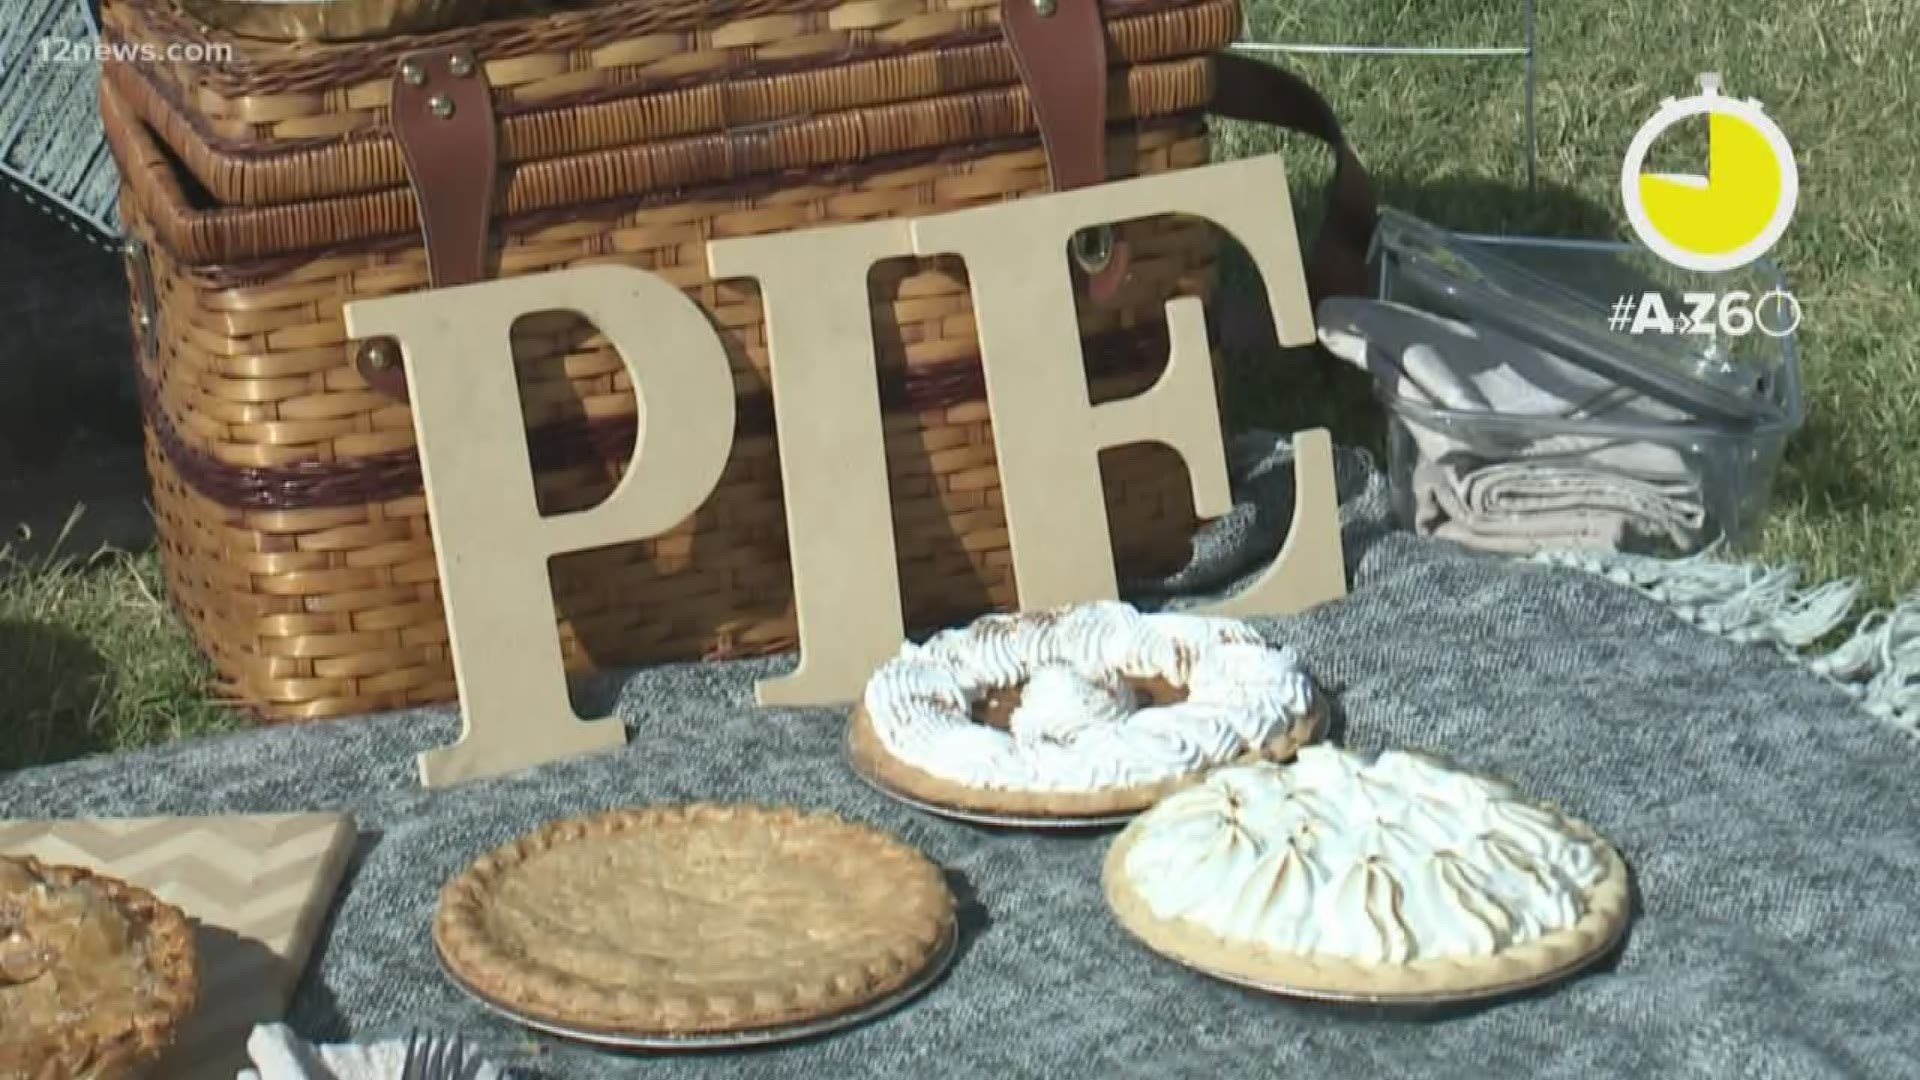 The 10th annual Pie Social is back at Hance Park in Phoenix. Colleen Sikora chats with a few of the bakers ahead of the event.